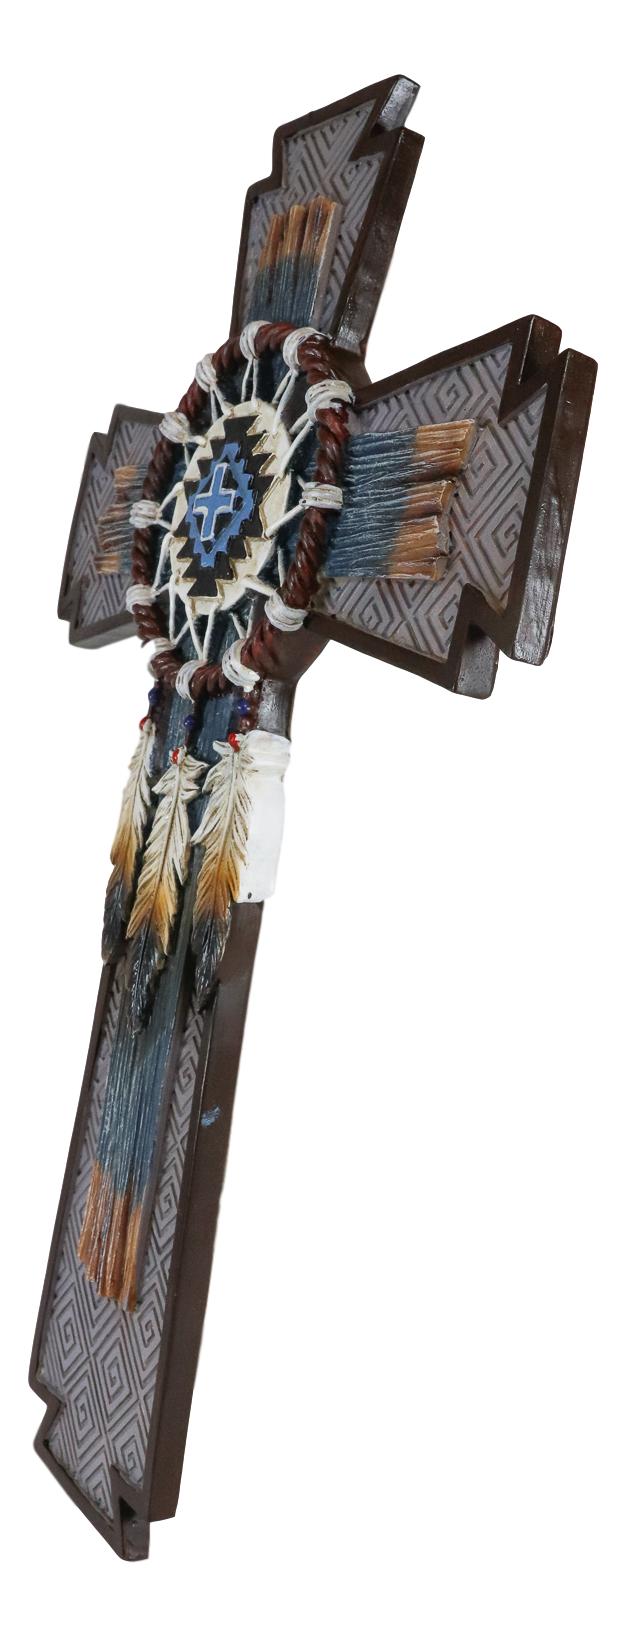 Ebros Southwest Native Indian Navajo Vector Eagle Feathers Web Dreamcatcher Wall Cross